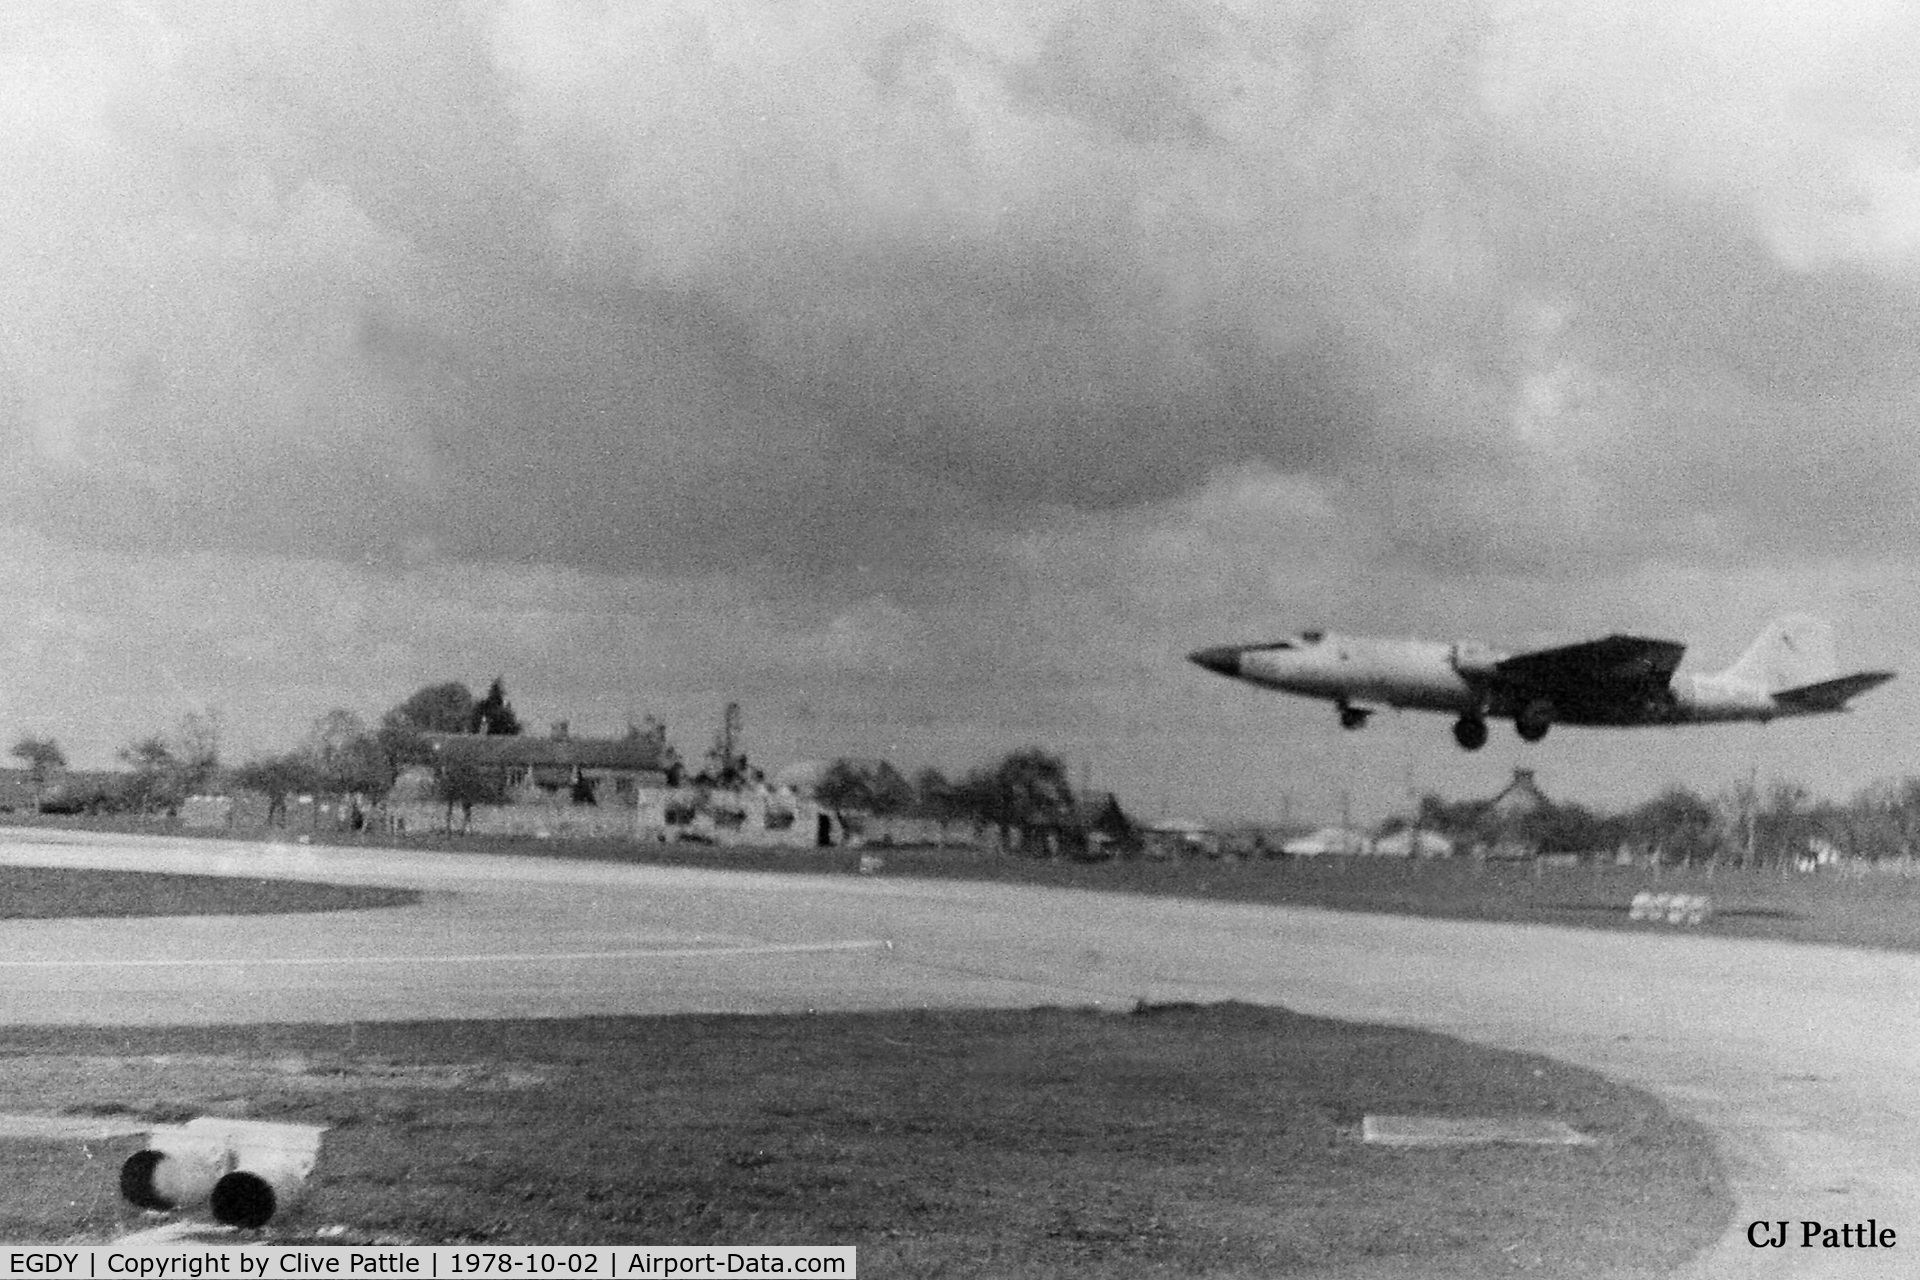 RNAS Yeovilton Airport, Yeovil, England United Kingdom (EGDY) - A Canberra T.22 of the based FRADU landing at RNAS Yeovilton in October 1978. The picture scanned from an old negative of mine and submitted (after a lot of photoshopping) for historical purposes only.